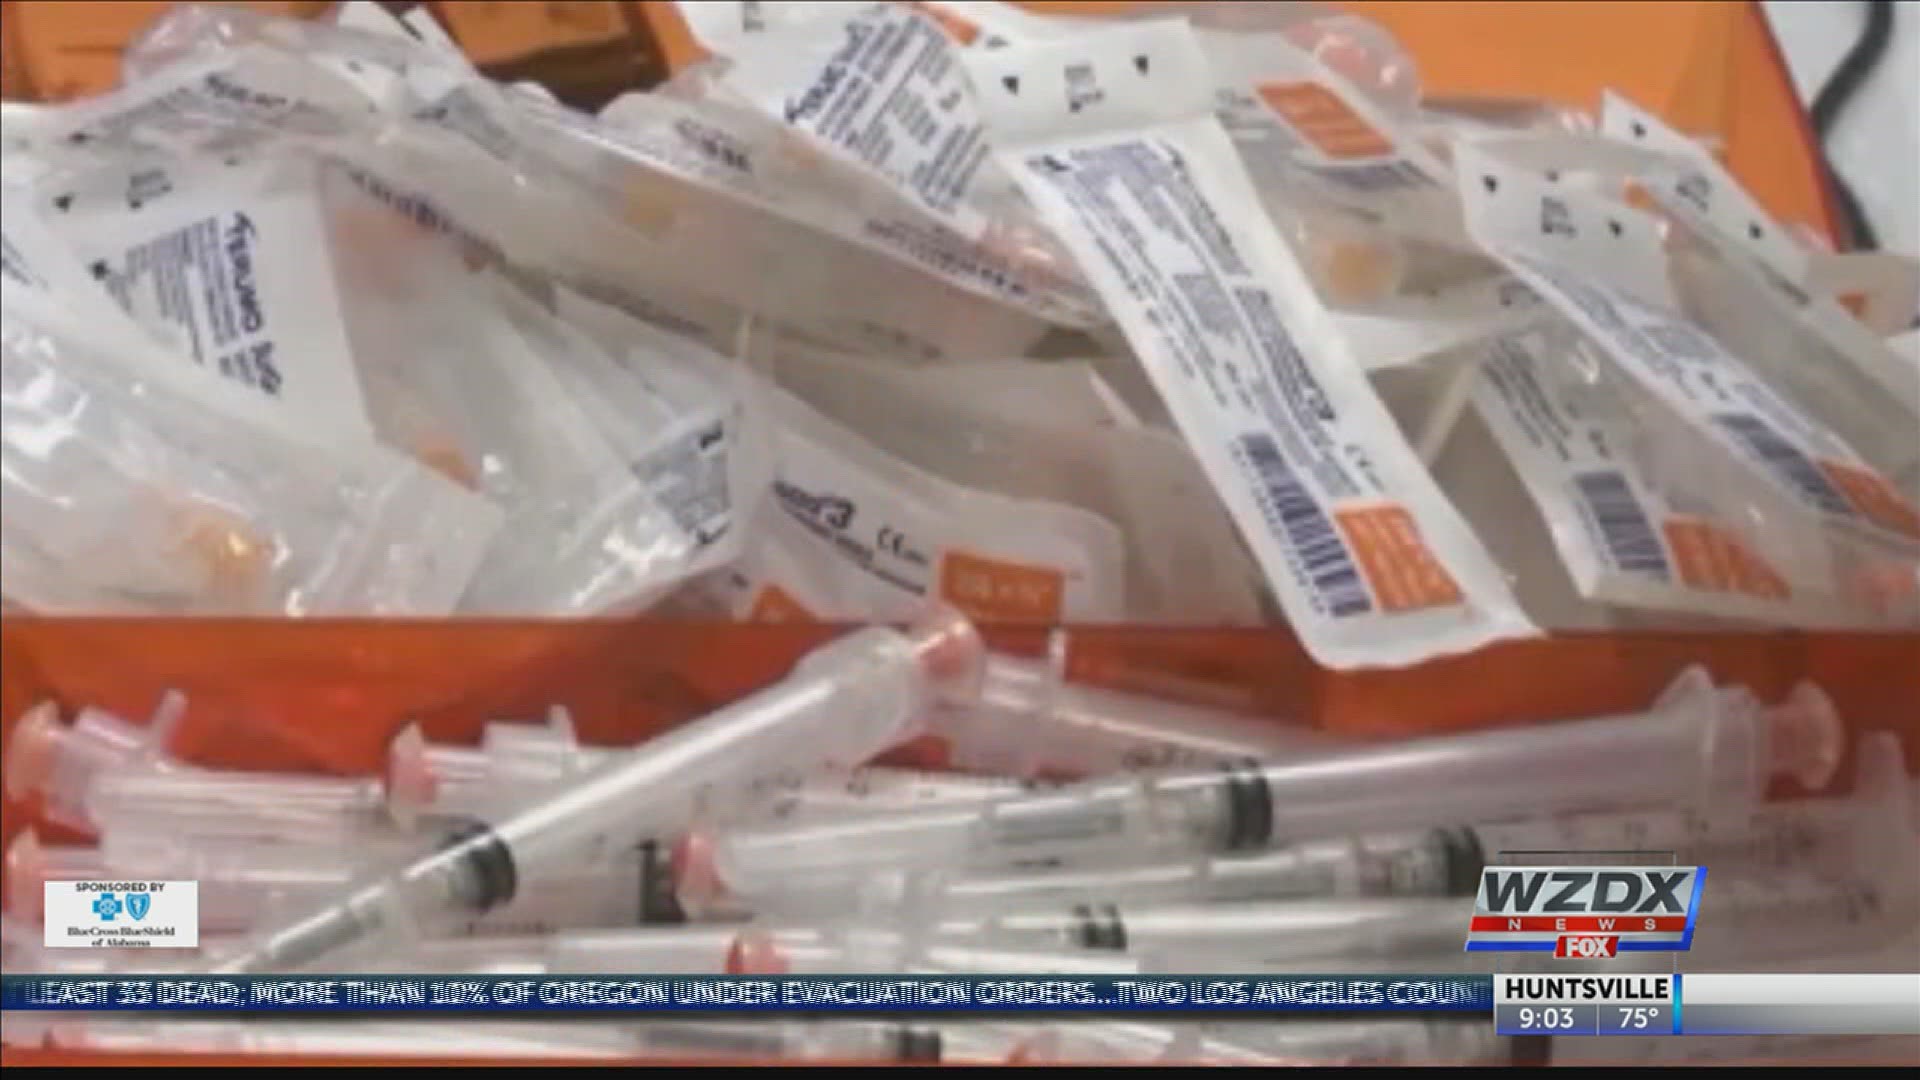 With flu season around the corner, doctors are urging more people to get the flu vaccine.